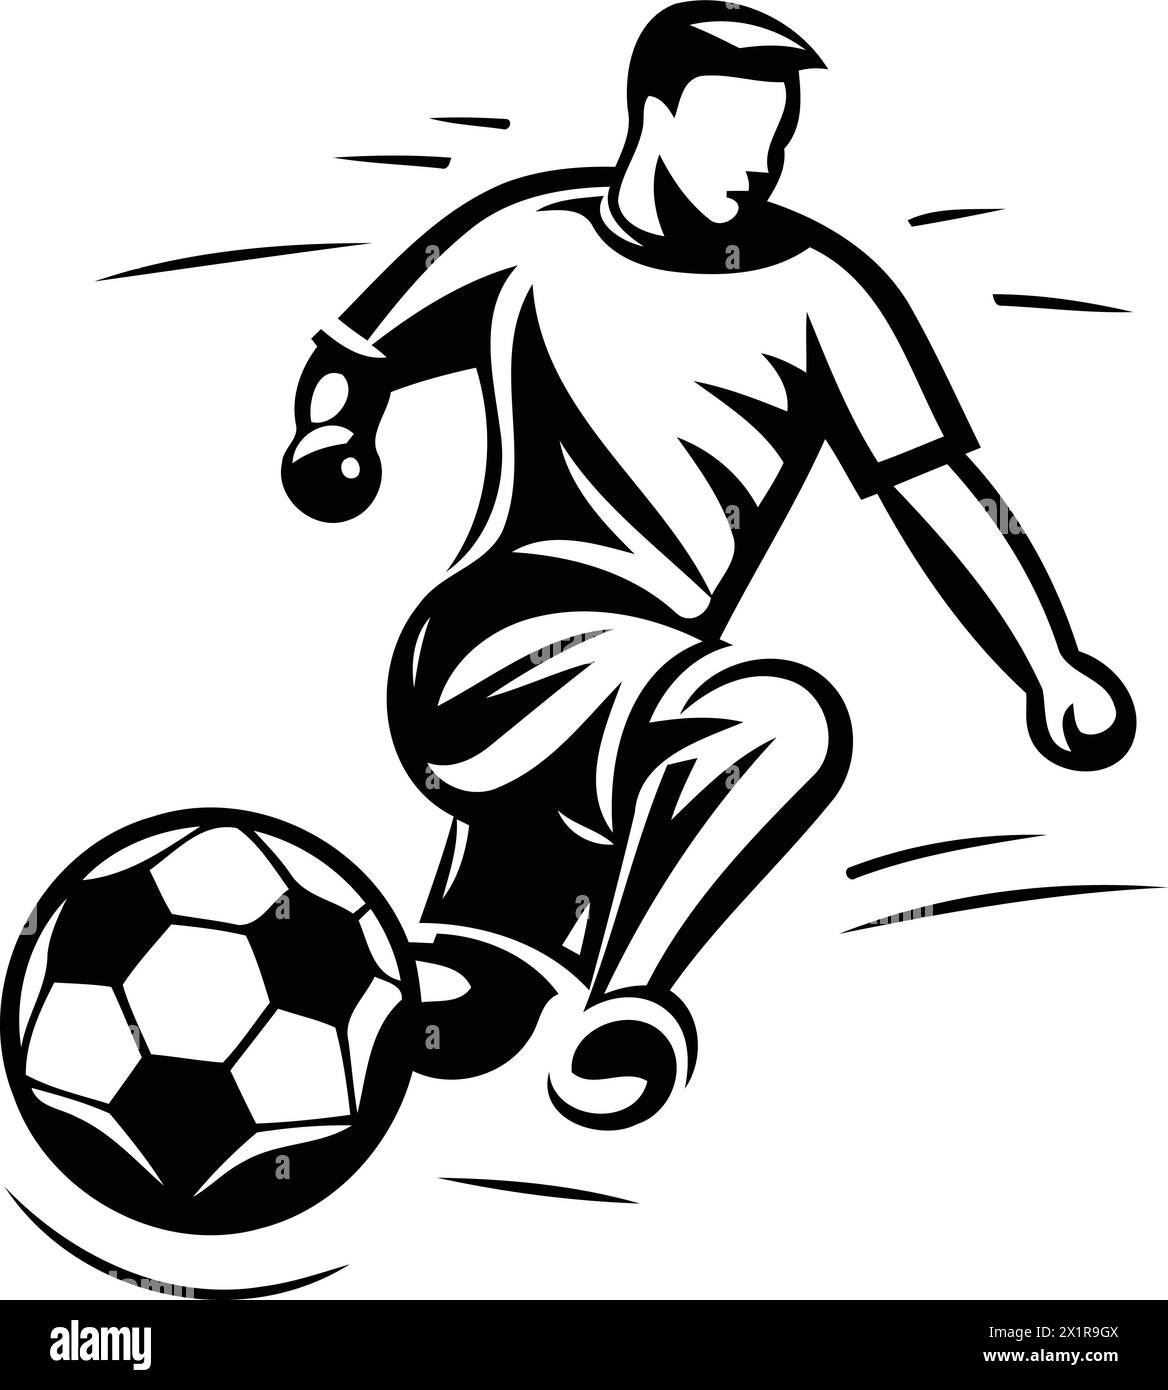 Soccer player with the ball. Vector illustration of a soccer player. Stock Vector